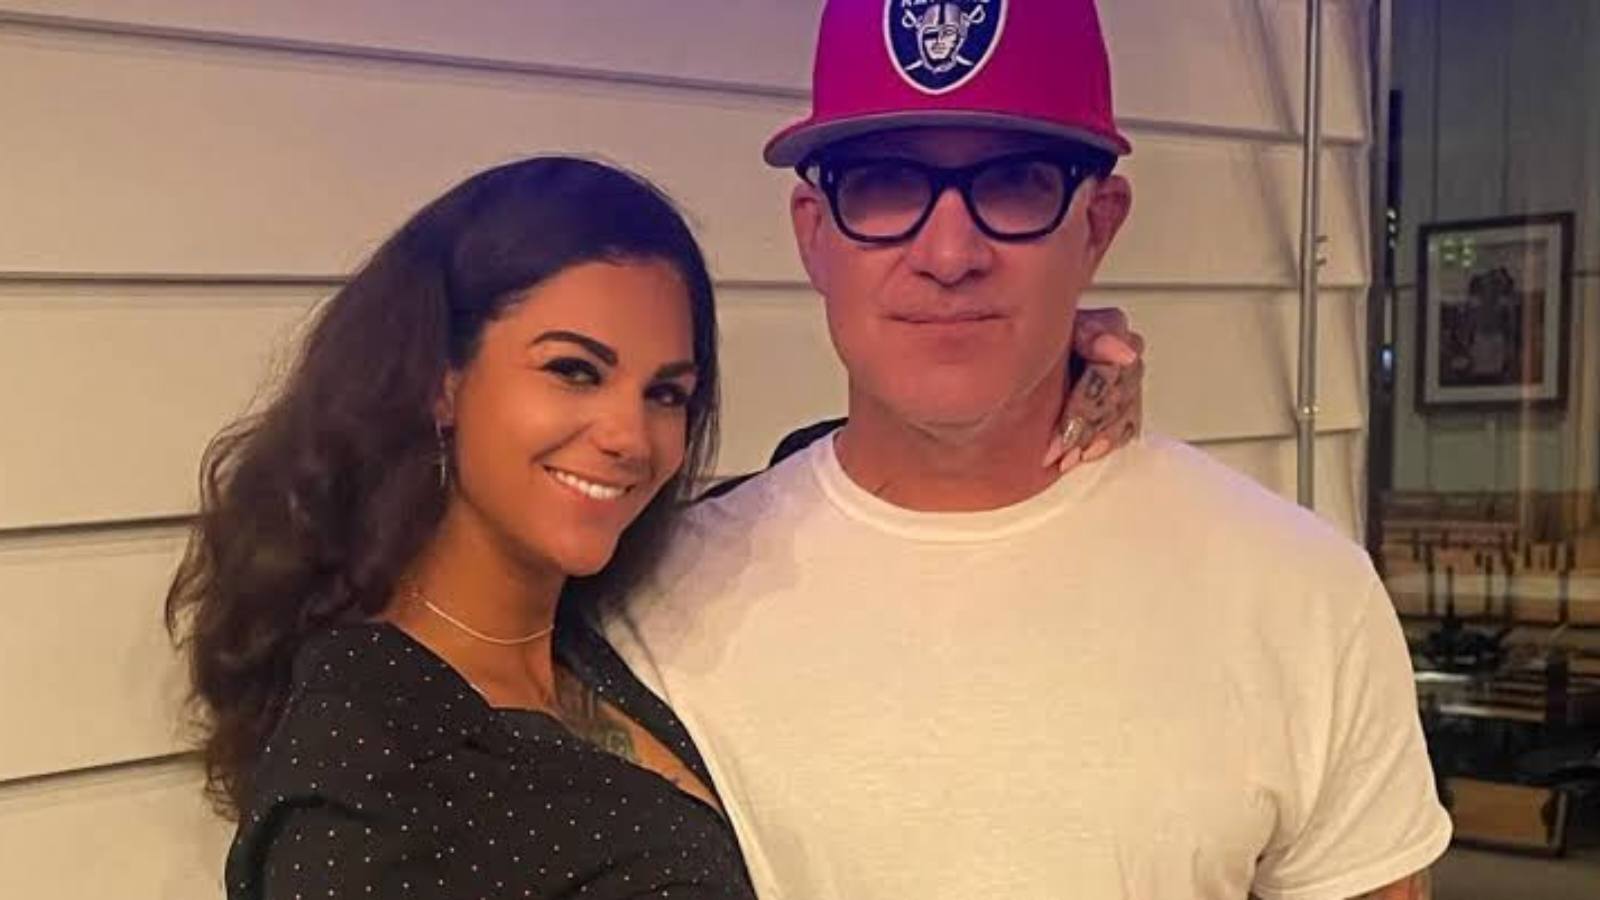 Sandra Bullocks Ex Jesse James Ties The Knot For The 5th Time With Porn Star Bonnie Rotten